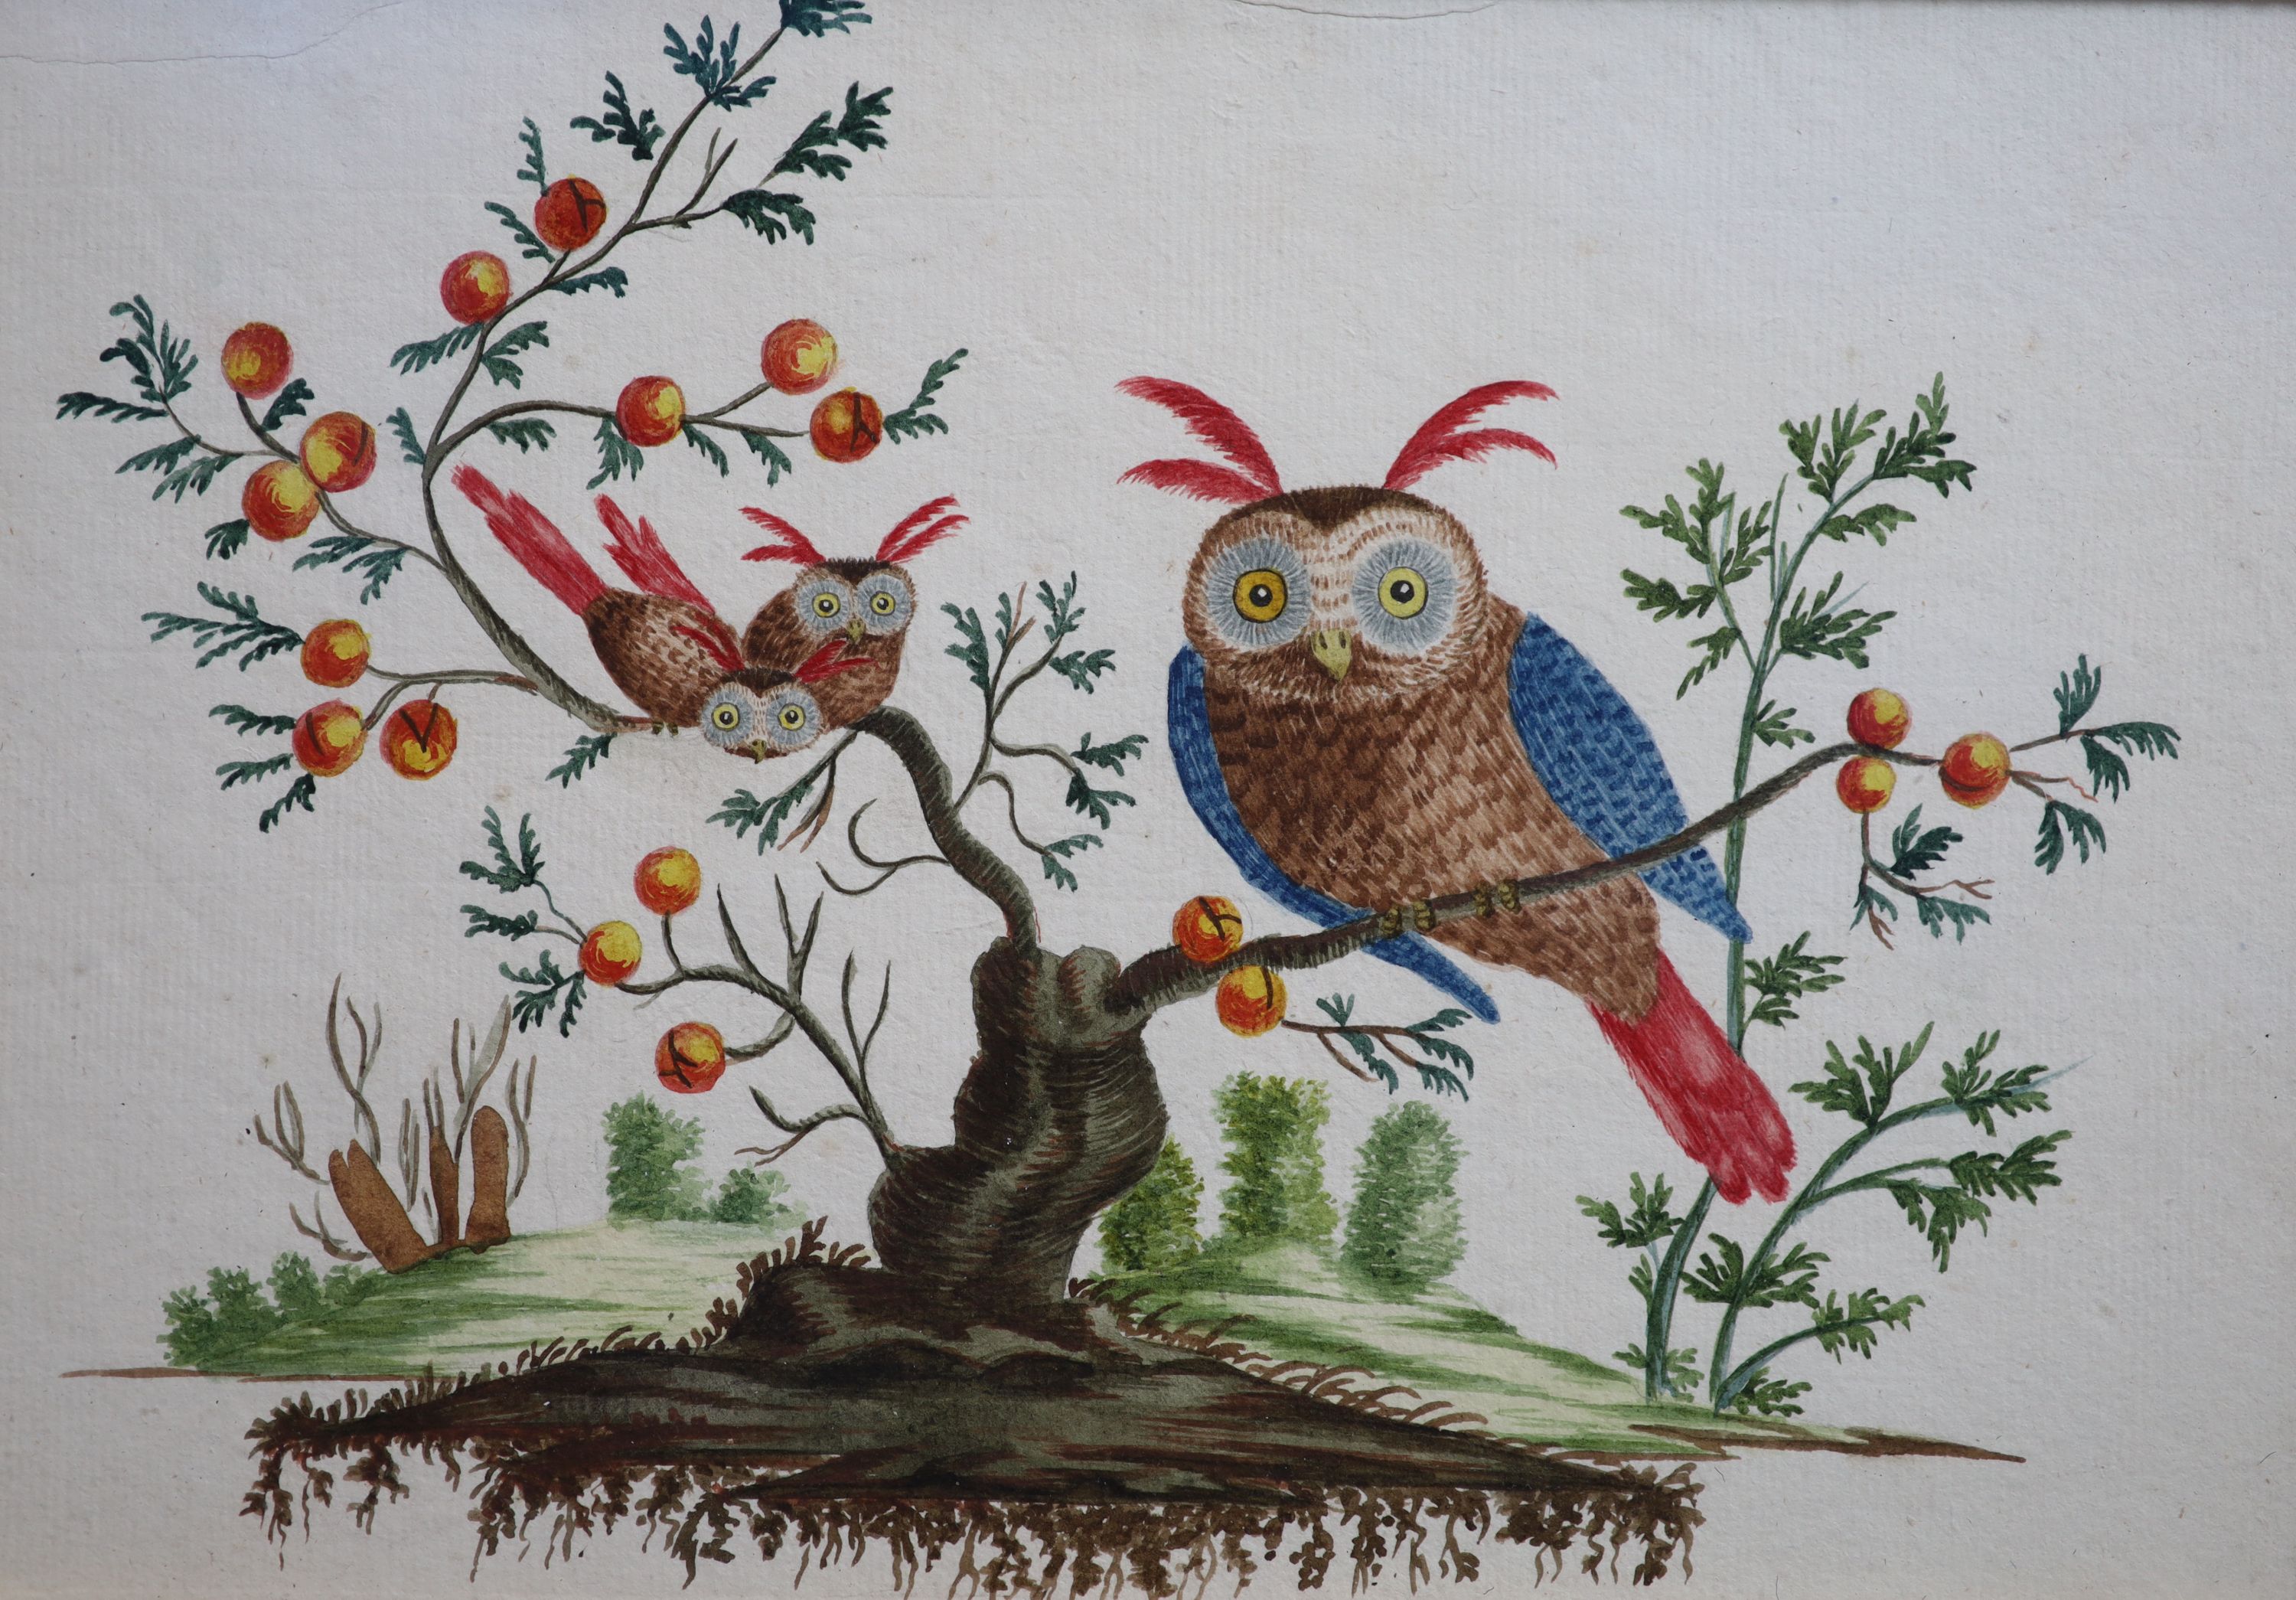 L Champquin (fl.c1800), Owl and owlets in a stunted fruit tree, watercolour, 18 x 26cm